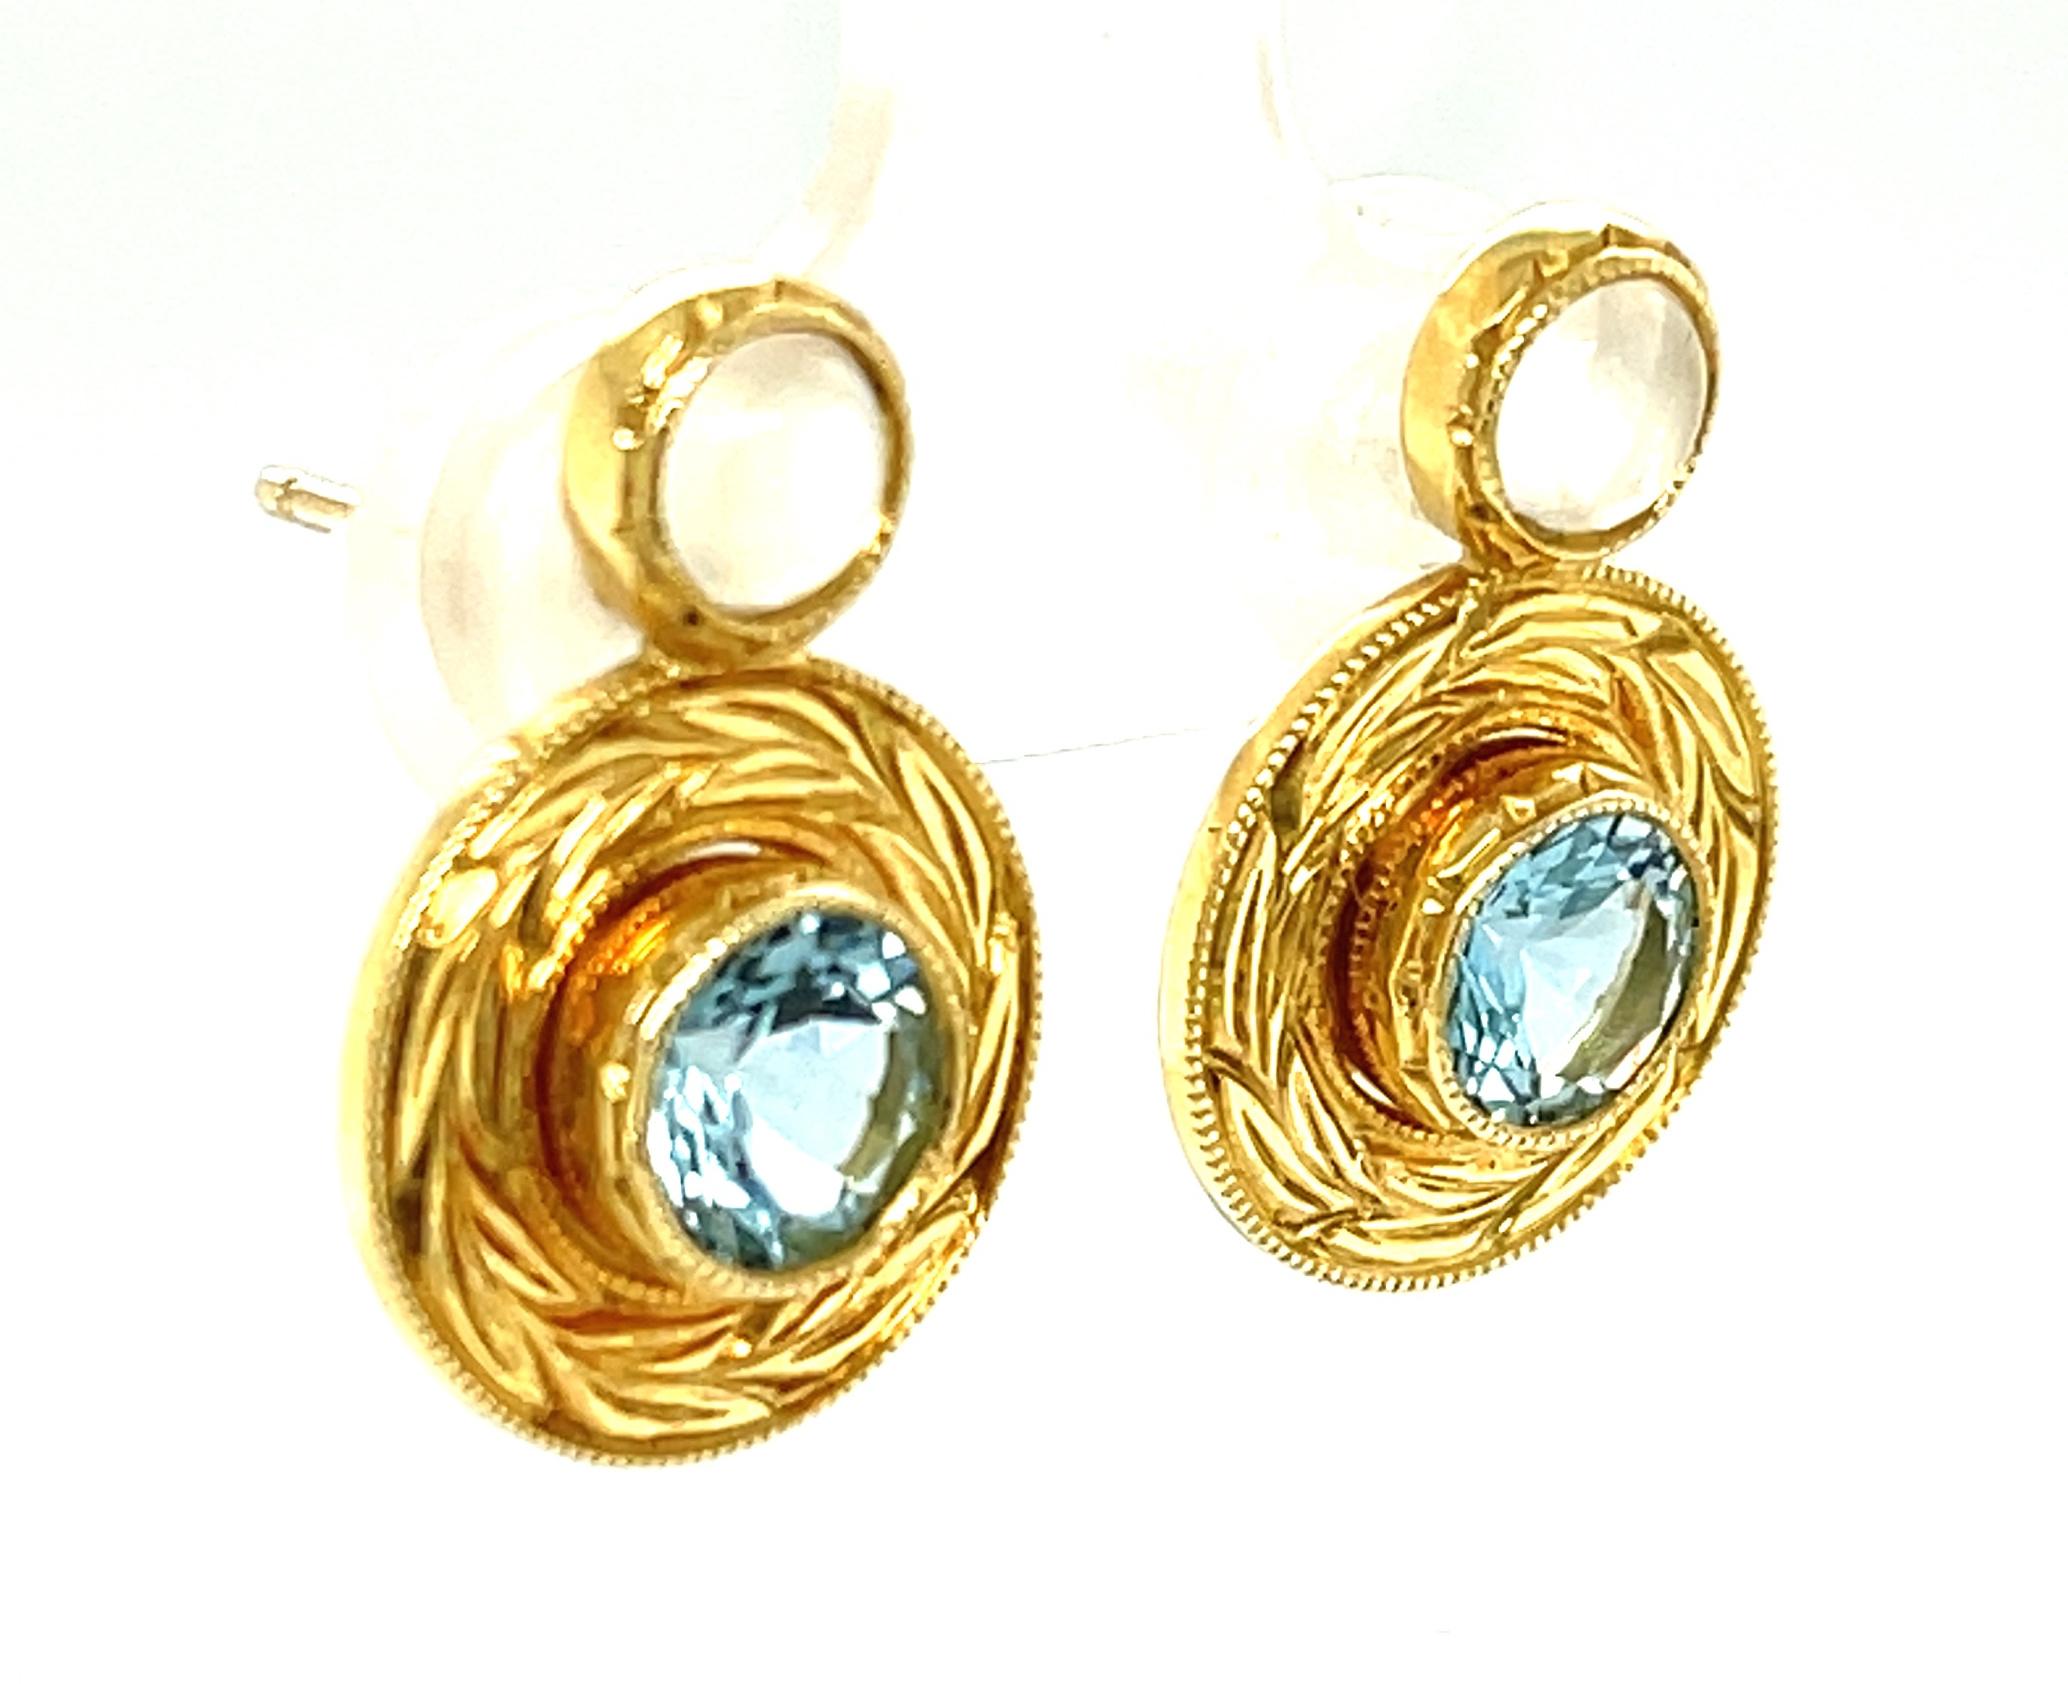 These beautiful earrings feature sparkling blue aquamarine gemstones and luminous moonstone cabochons set in 18k yellow gold bezels. The aquamarine settings have hand-engraved yellow gold frames that add sophisticated style and a luxurious touch to